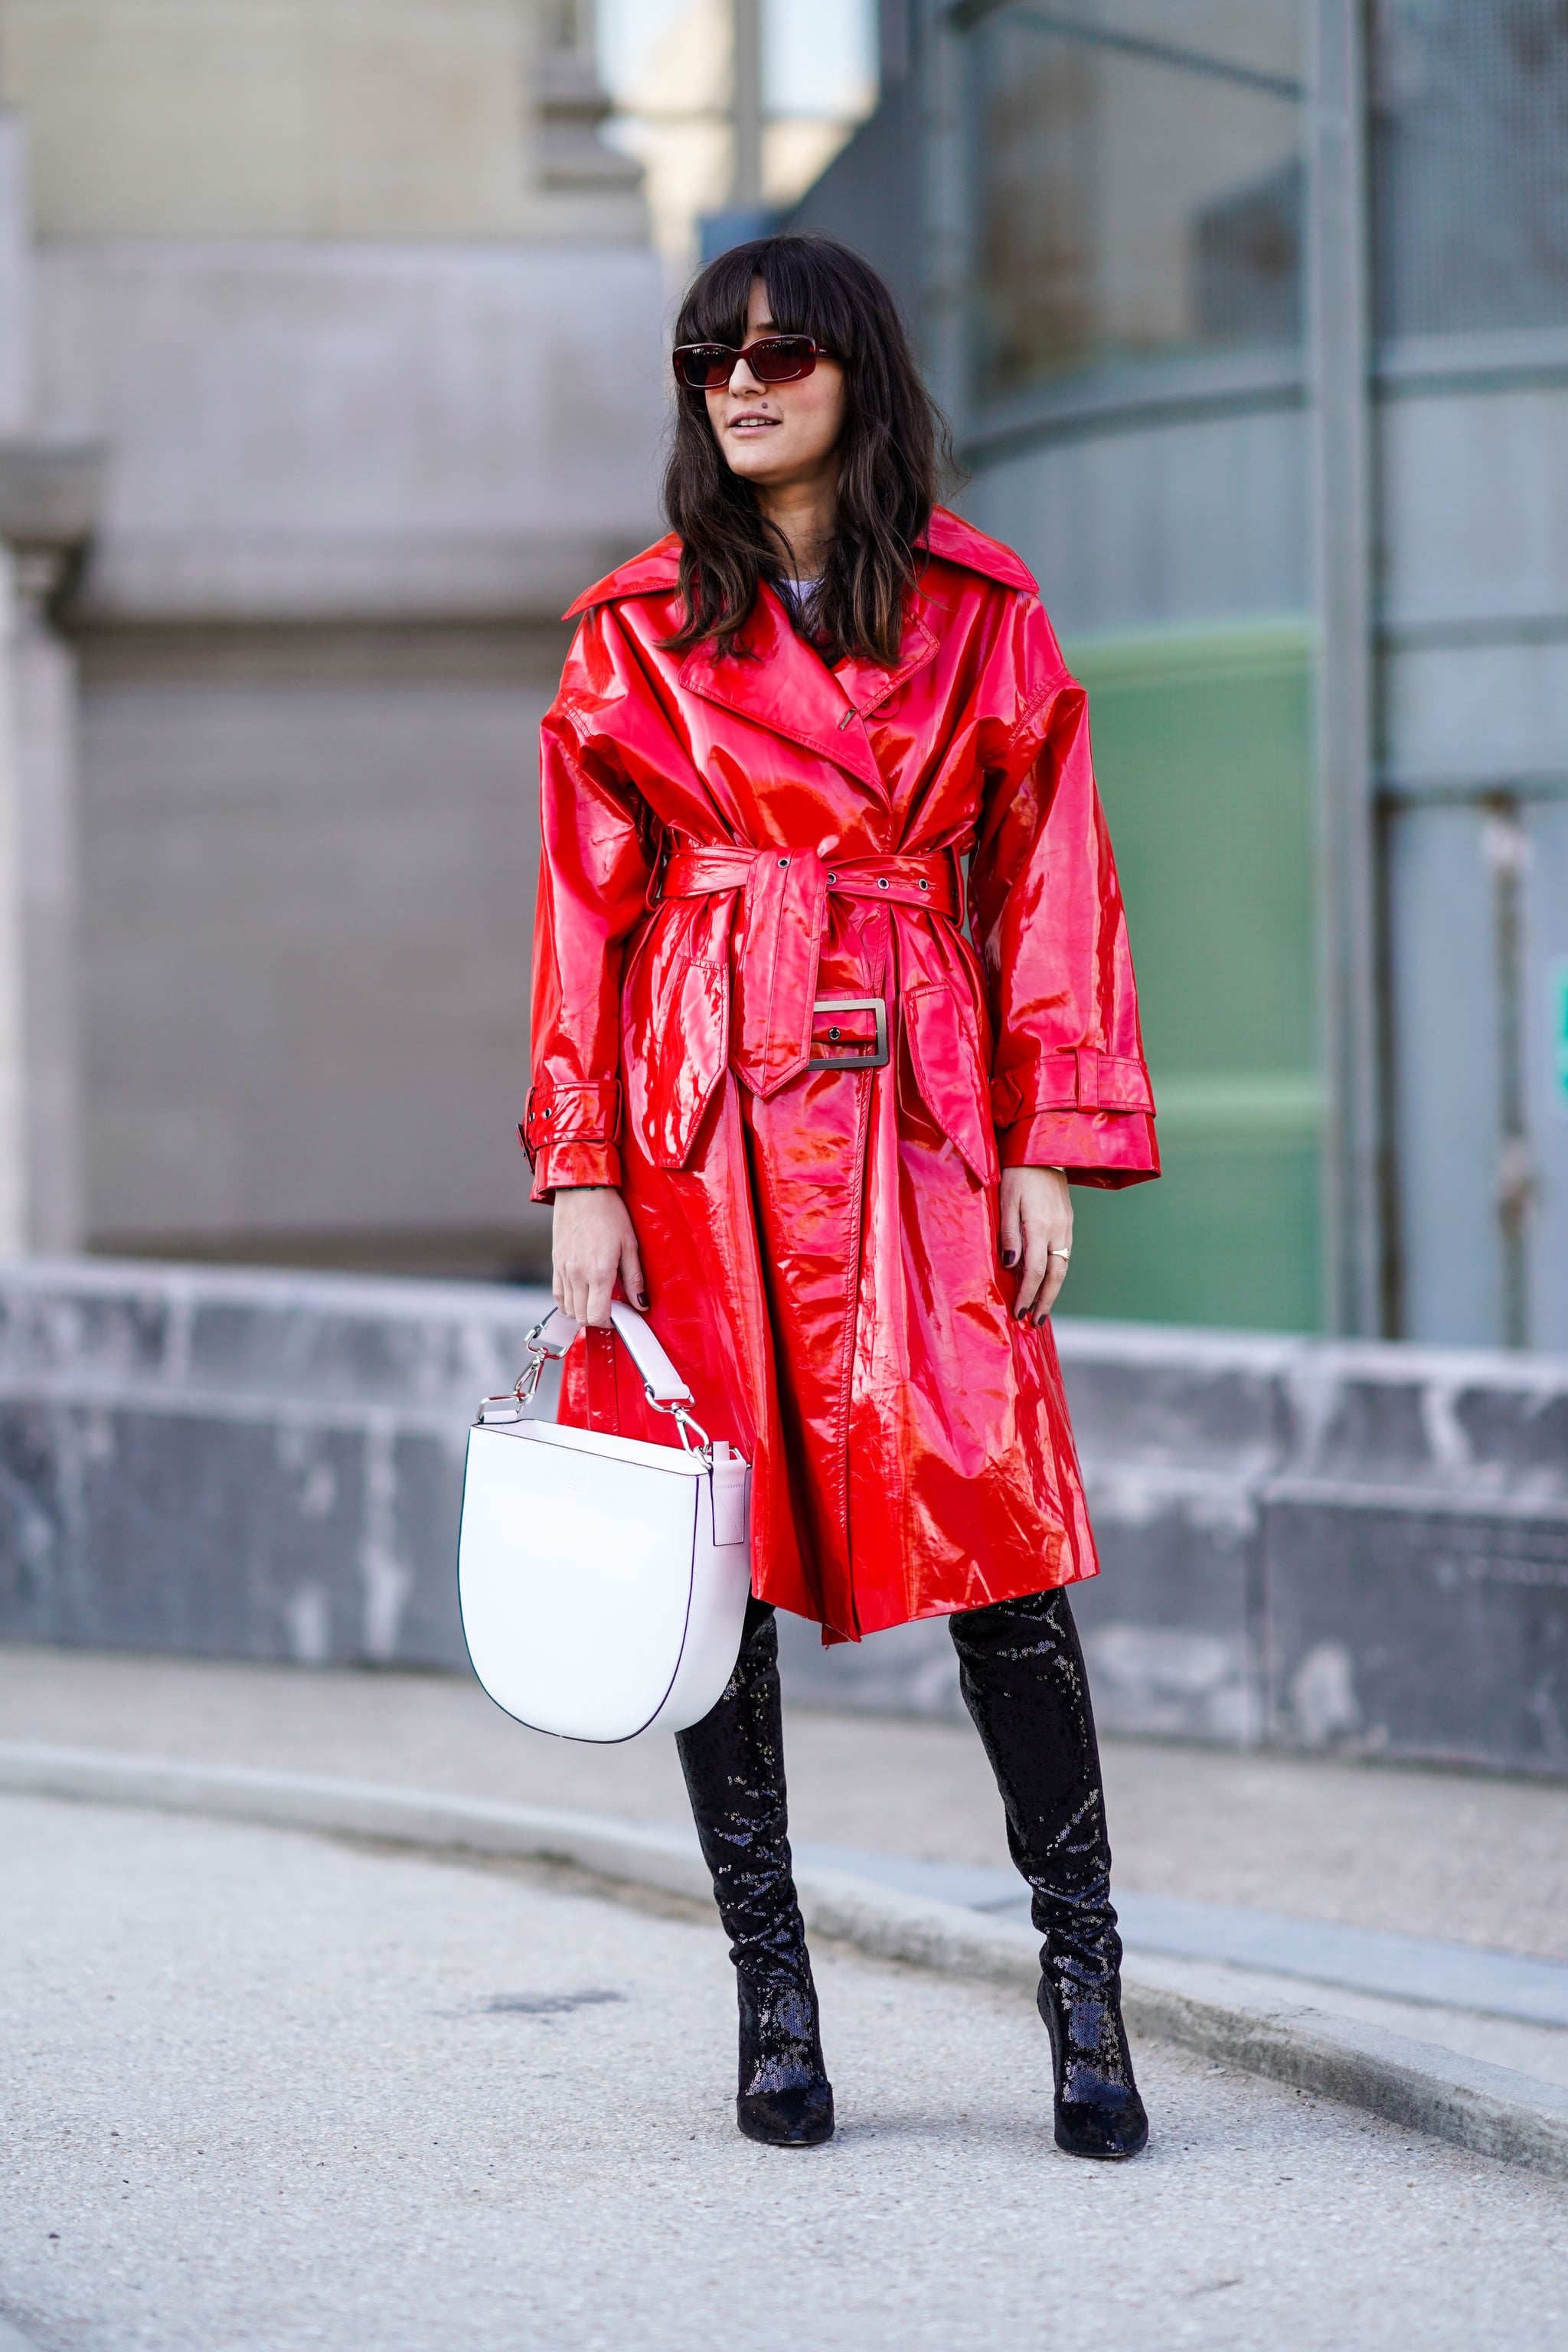 A high-shine red overcoat will make even the most boring look stand out in a crowd.